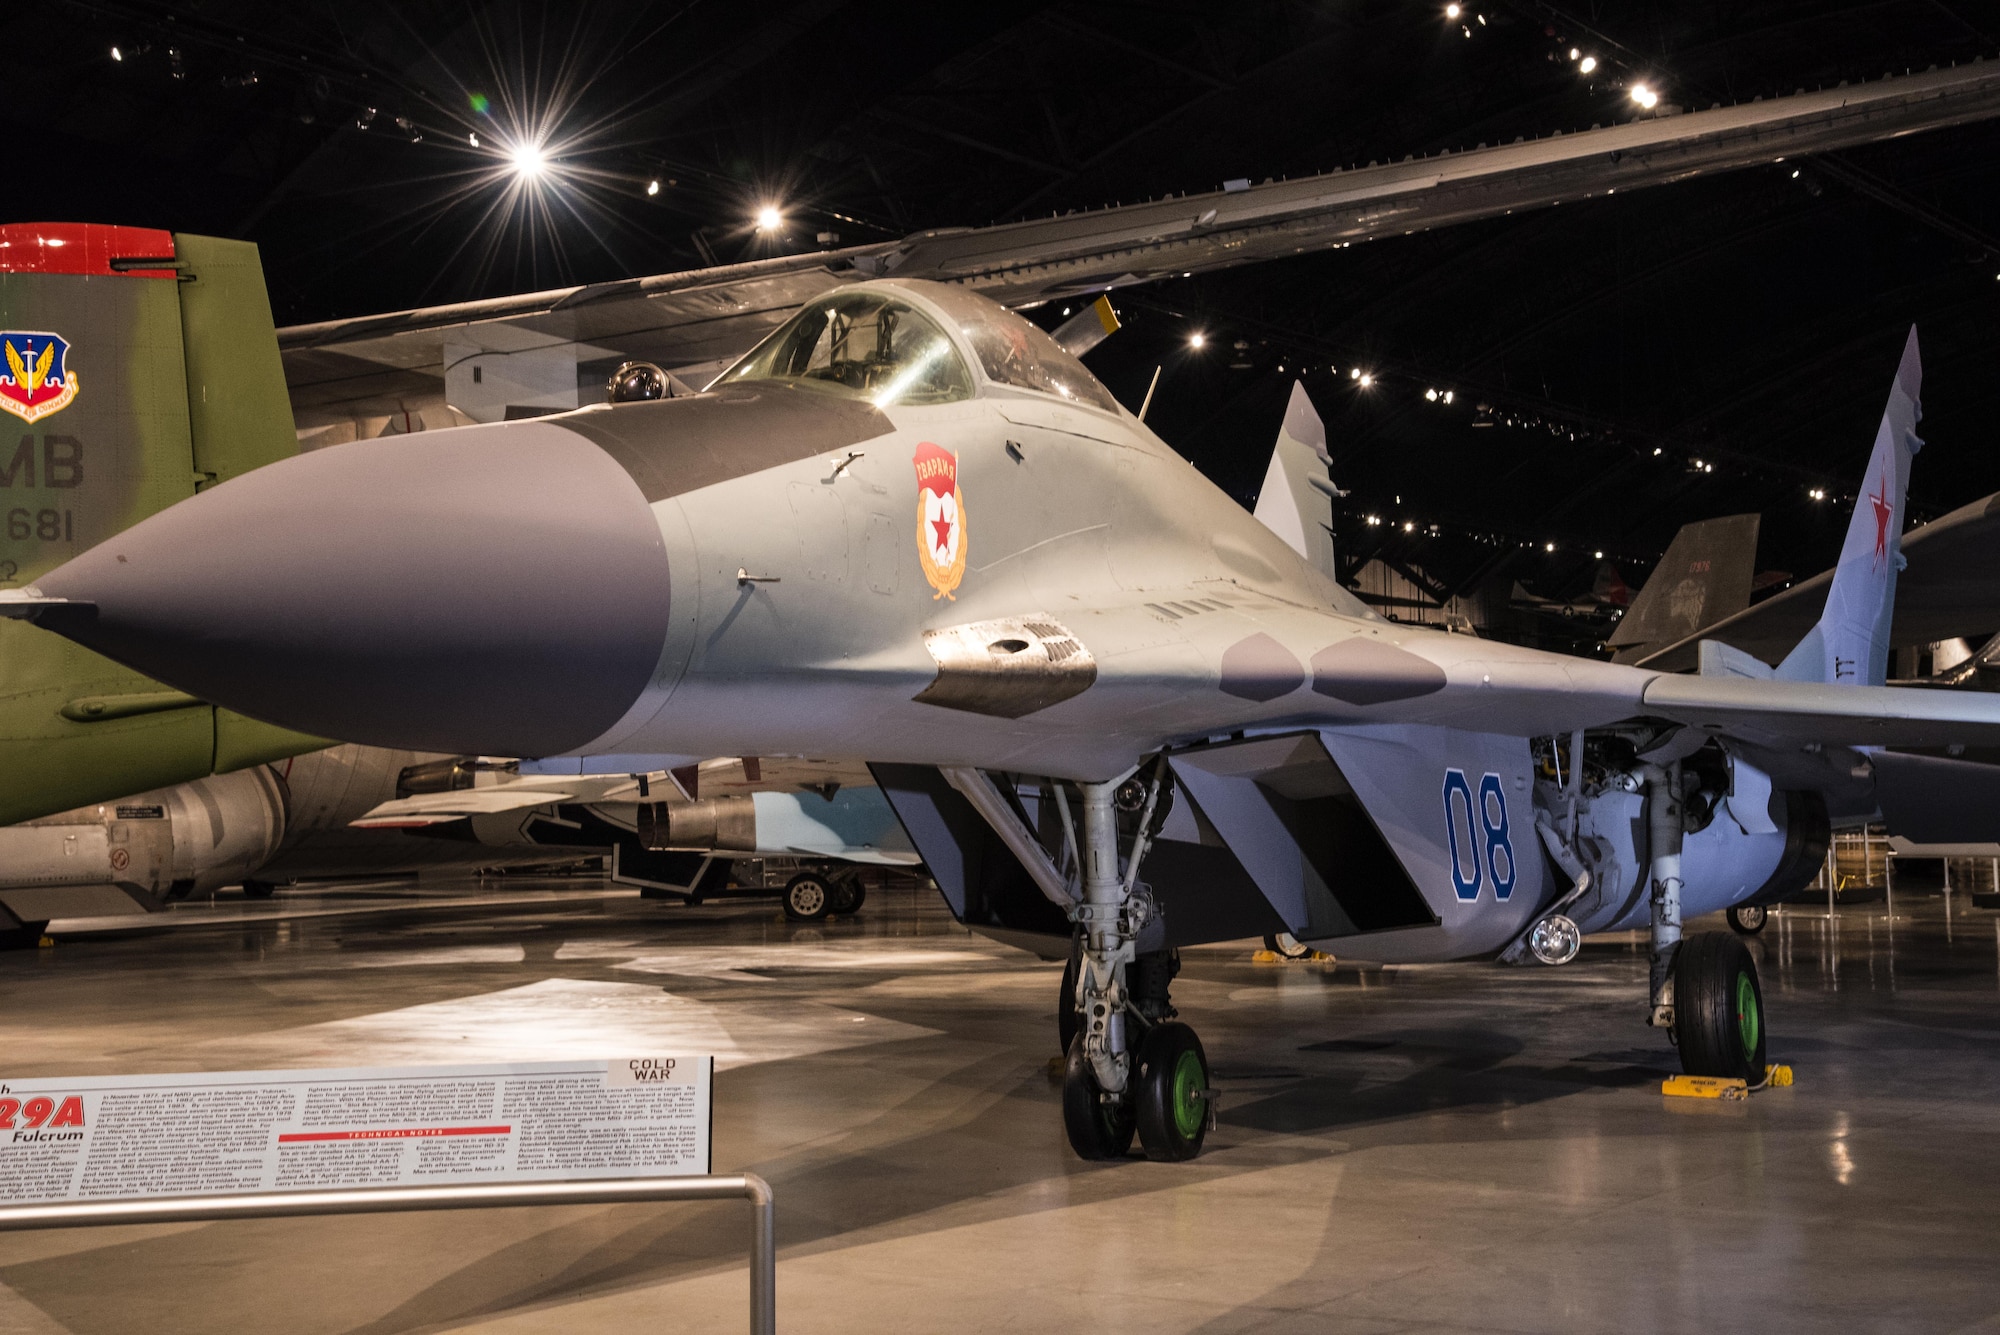 DAYTON, Ohio -- Mikoyan-Gurevich MiG-29A on display in the Cold War Gallery at the National Museum of the United States Air Force. (U.S. Air Force photo by Ken LaRock) 